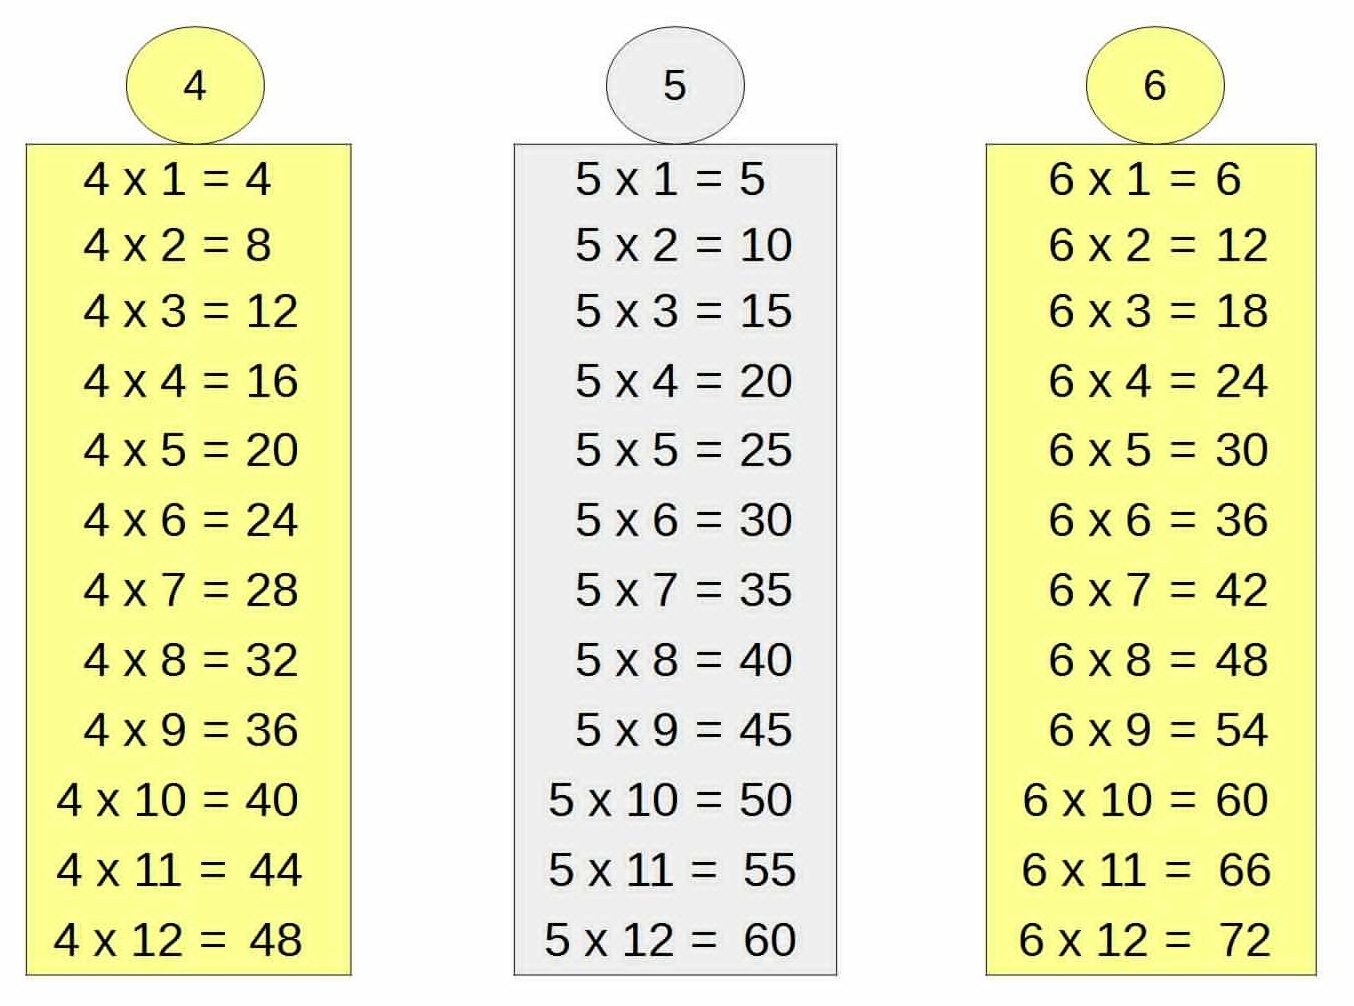 Multiplication Tables for 4, 5, and 6